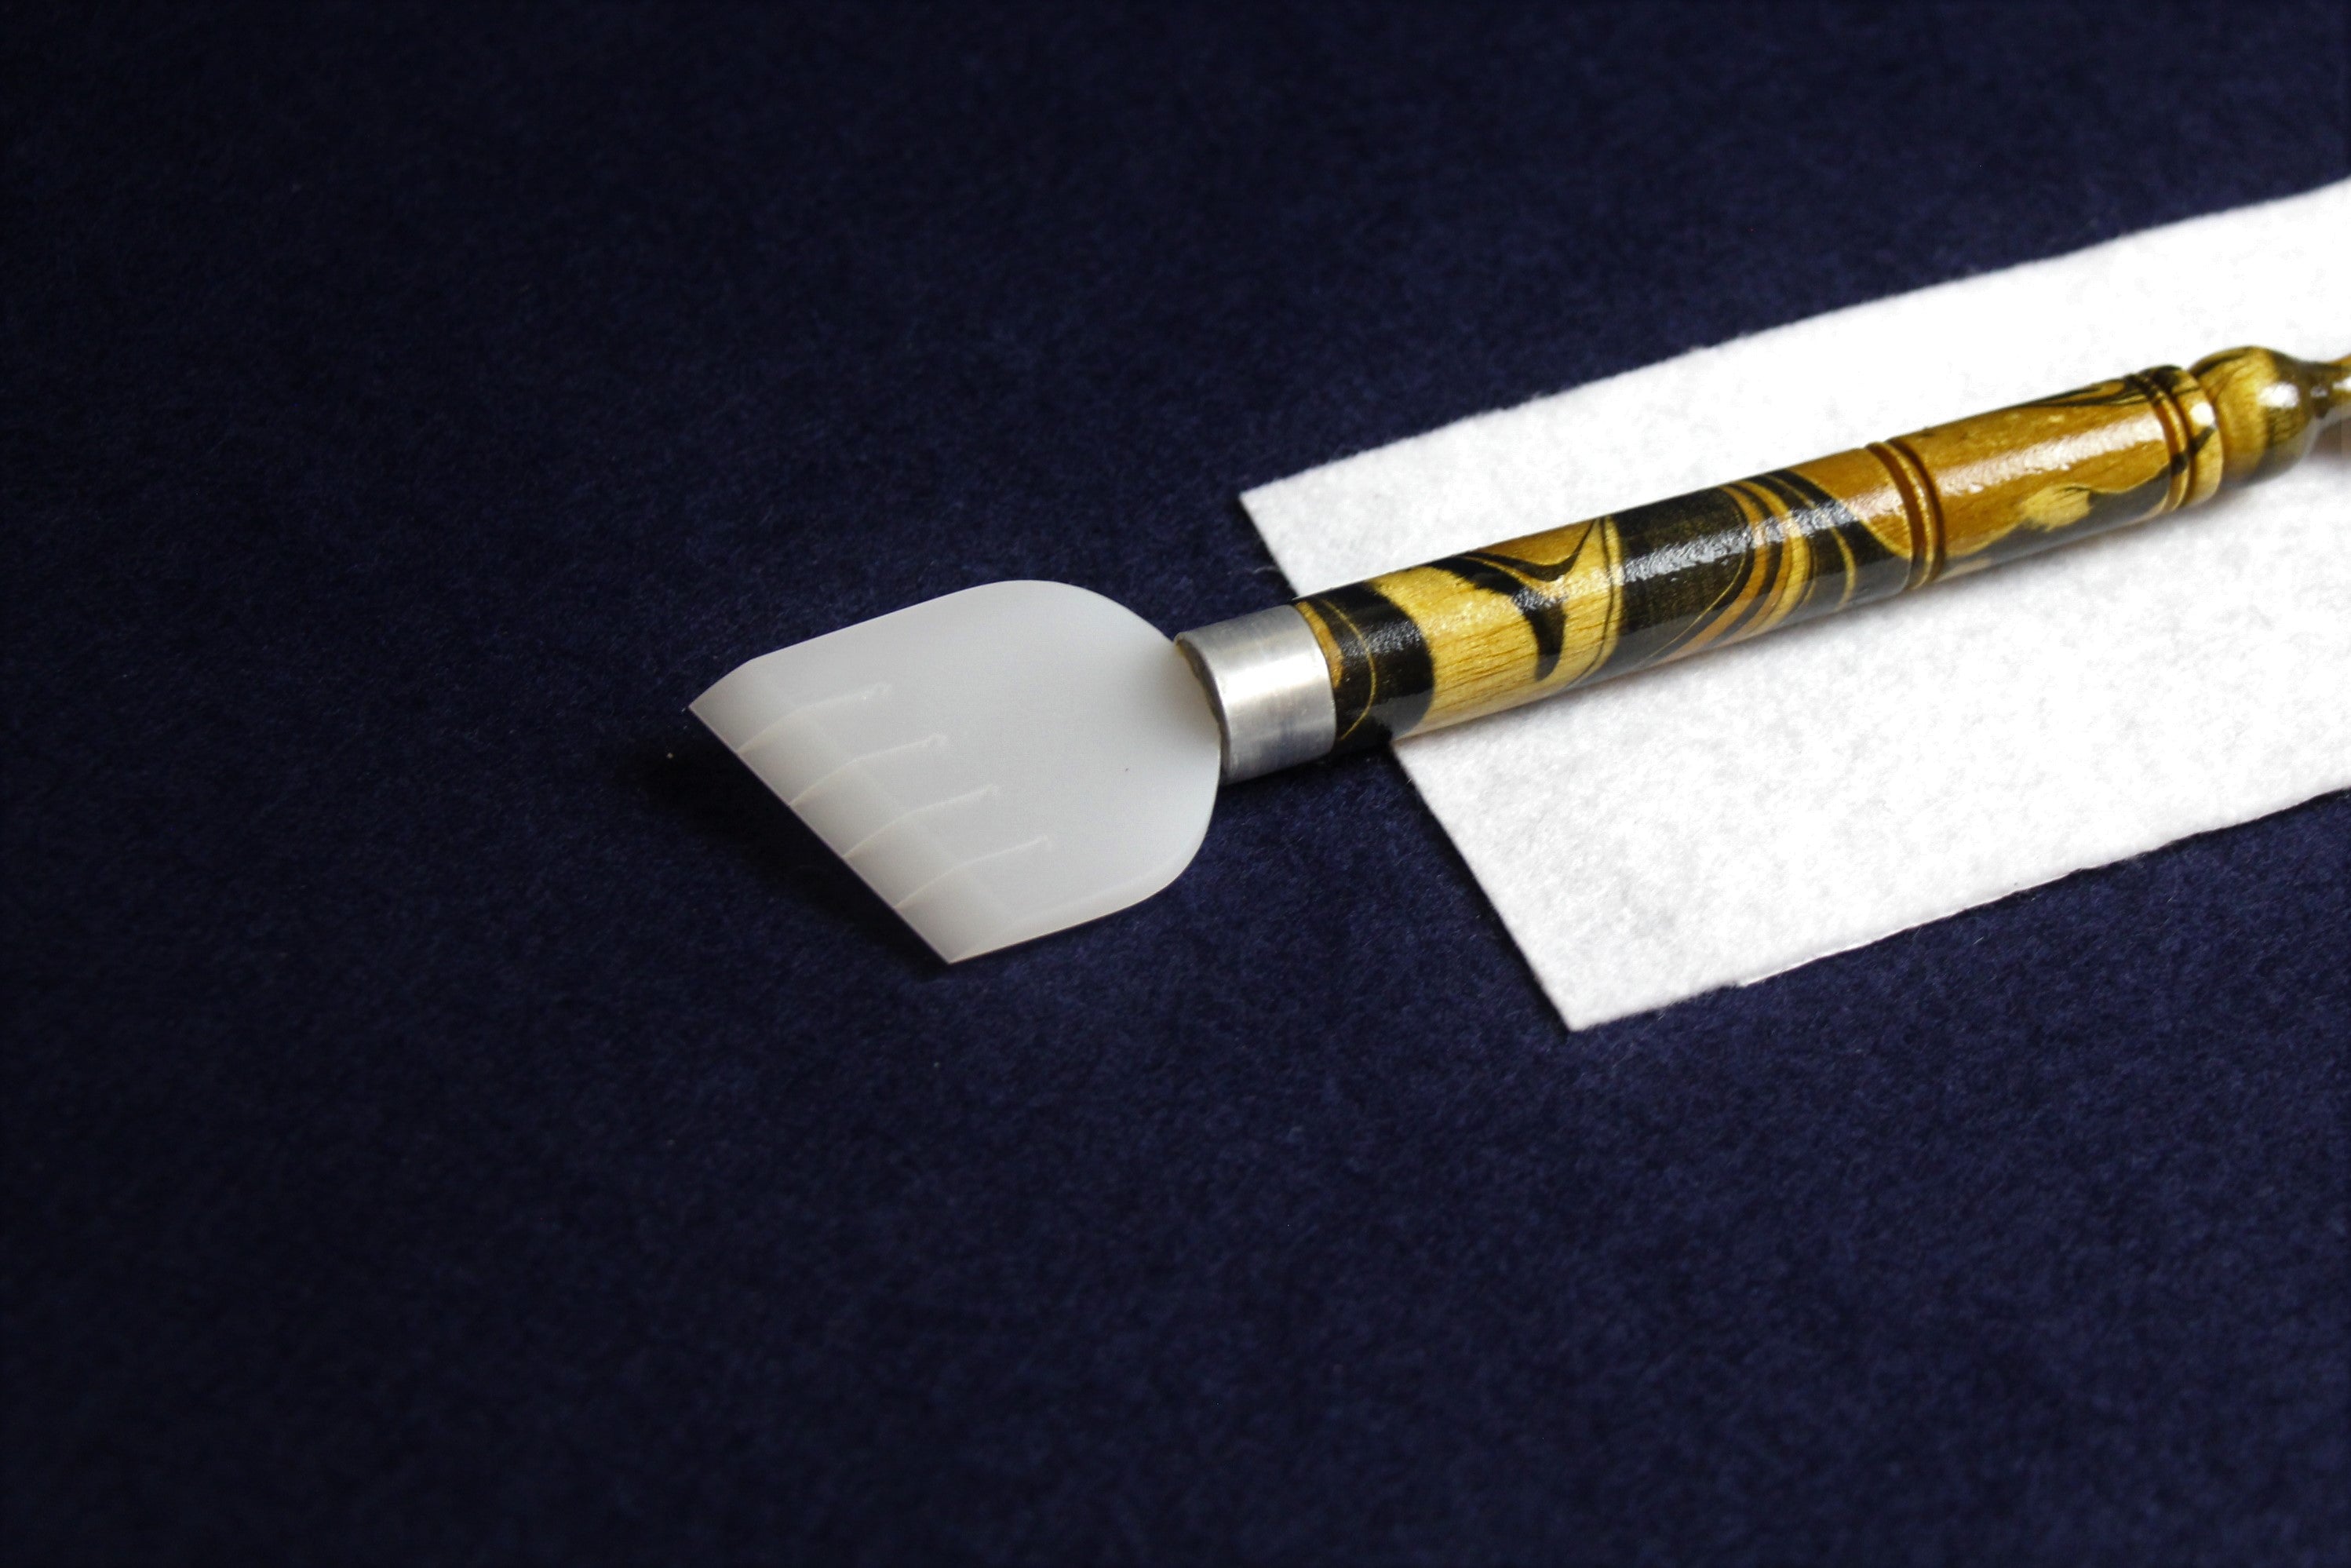 Single extra wide qalam pen with acrylic nib for Arabic calligraphy: from 36 to 40 mm